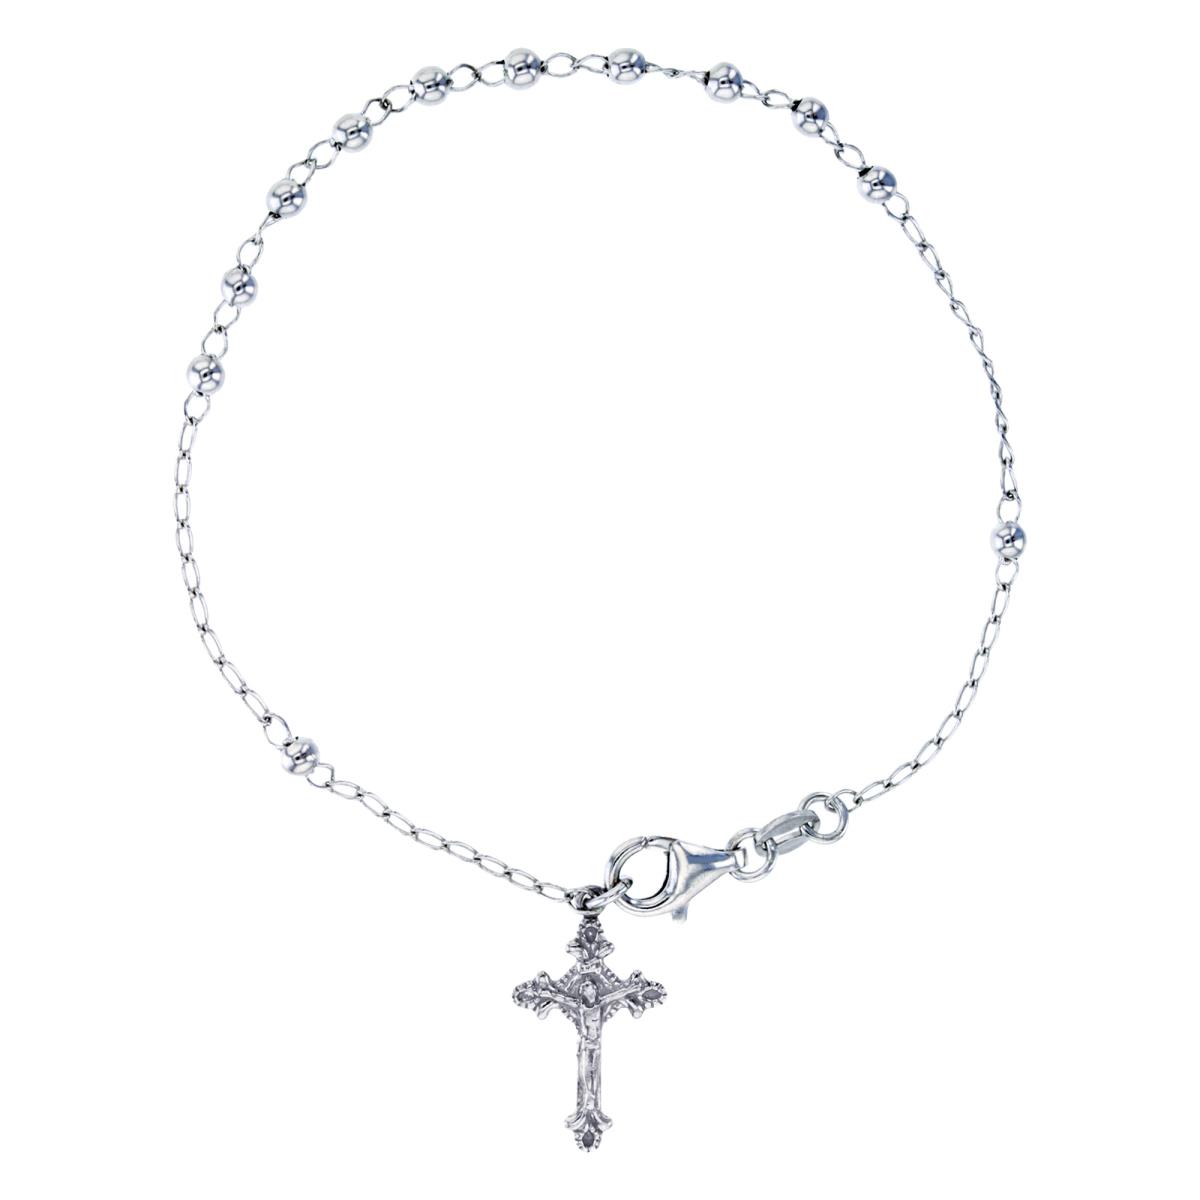 Sterling Silver Rhodium 18x12mm Crucifix Charm & Beads on Chain 7.75"Rosary Bracelet